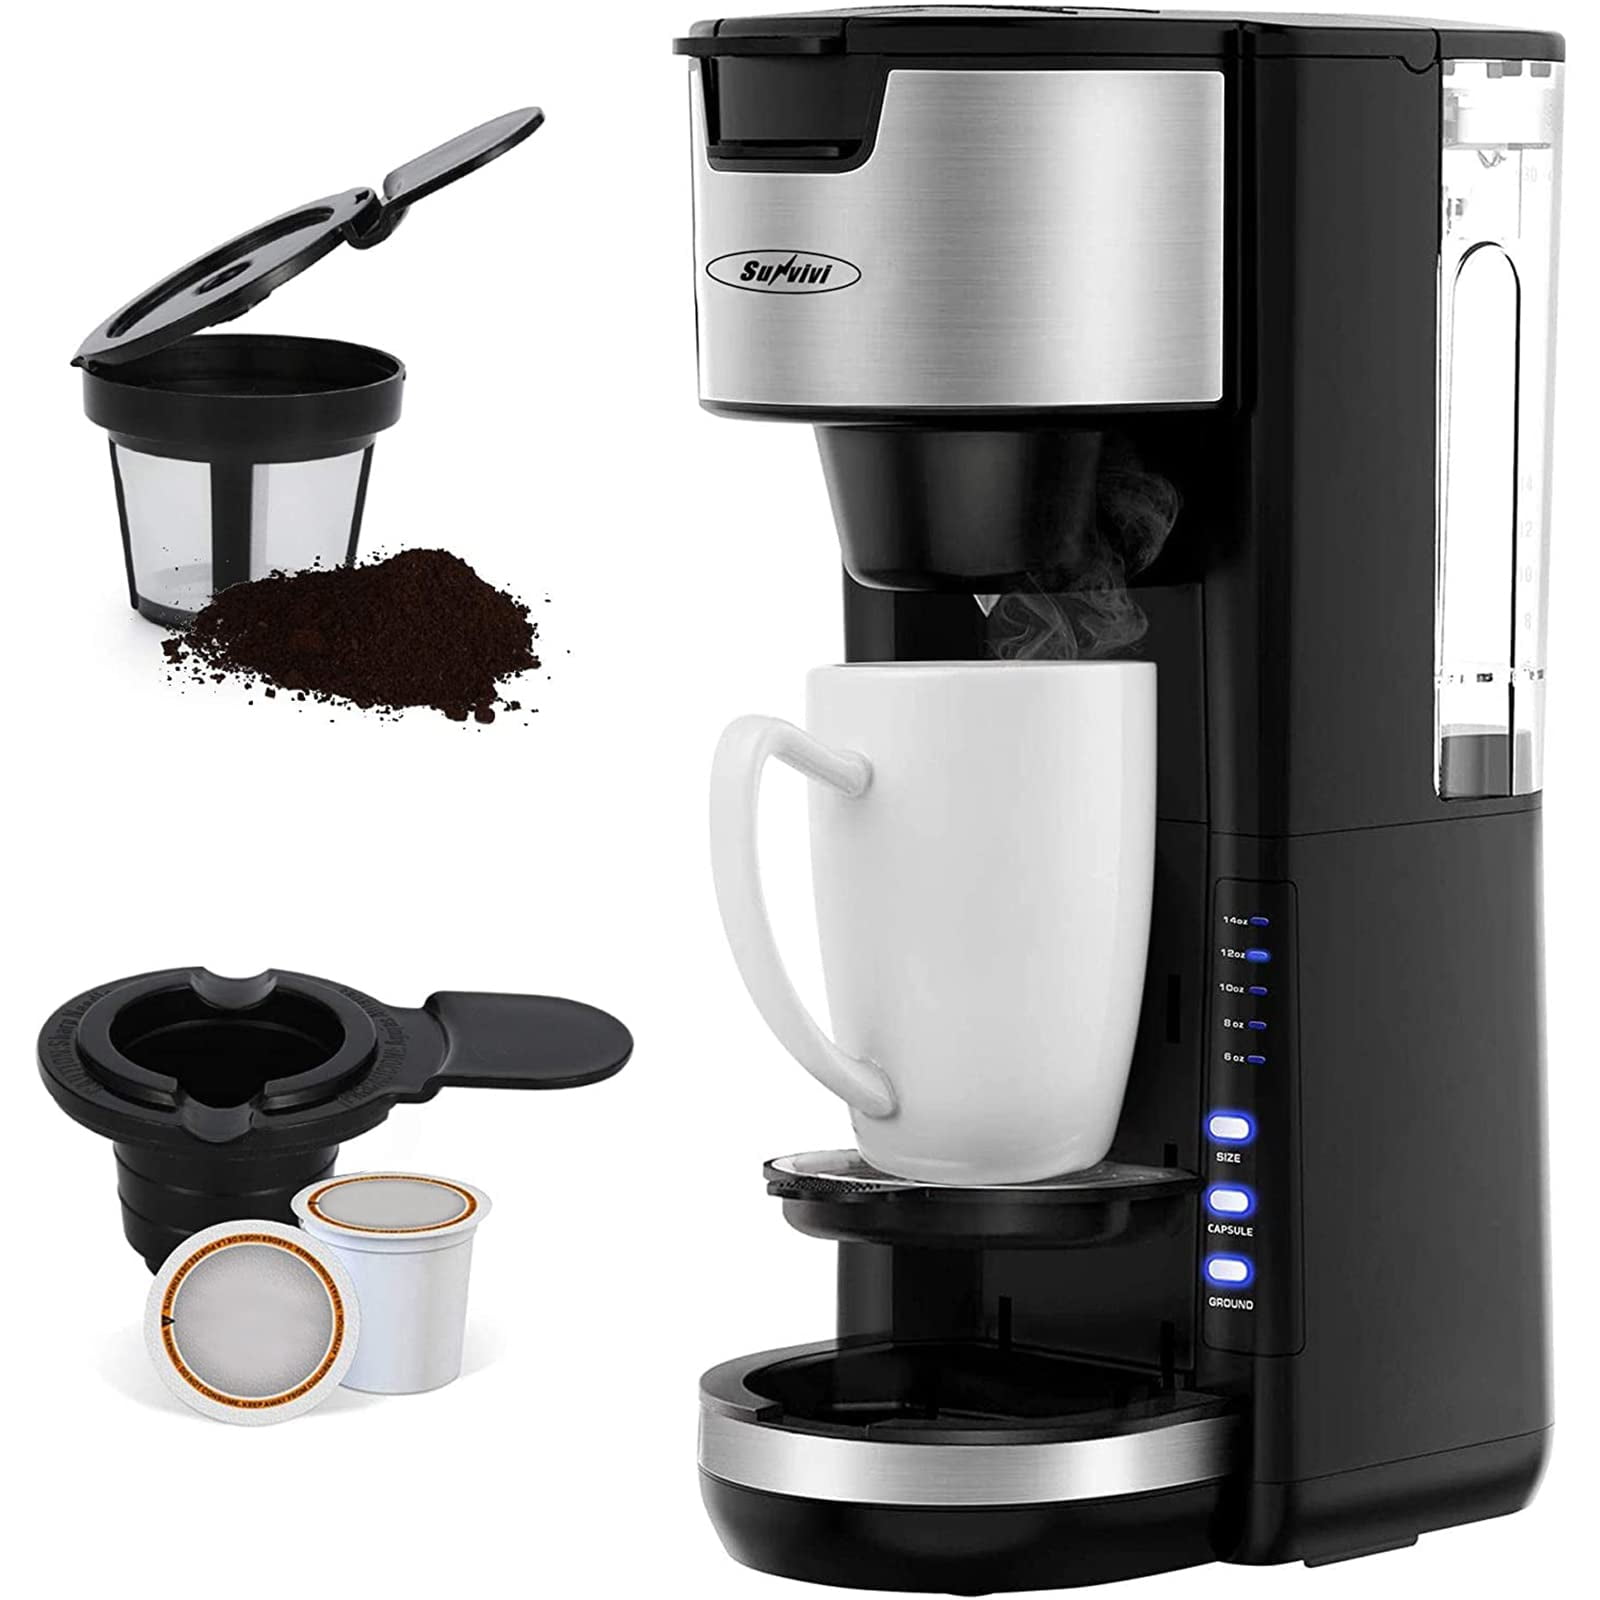 8 Best Single-serve Coffee Makers for All Caffeine Addicts